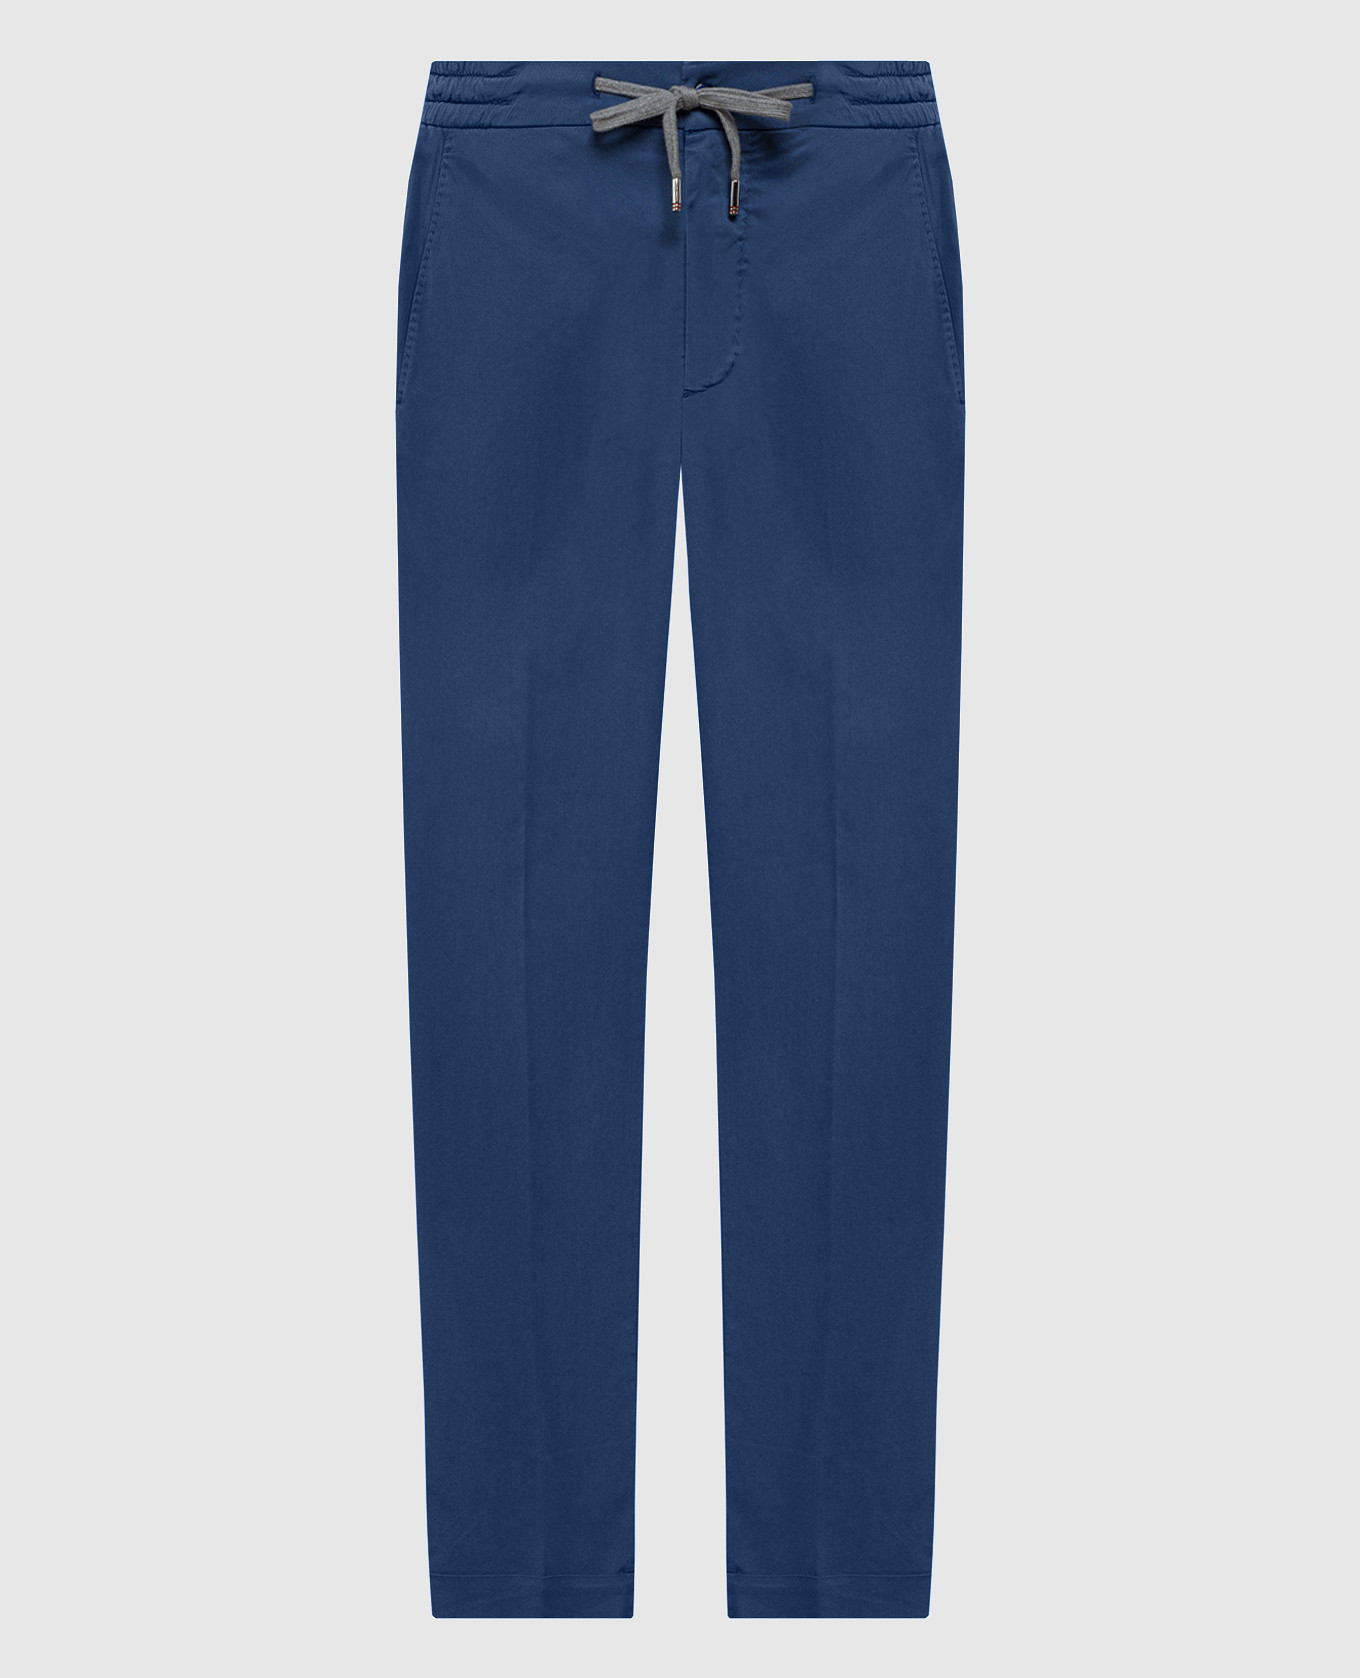 Caracciolo blue tapered trousers